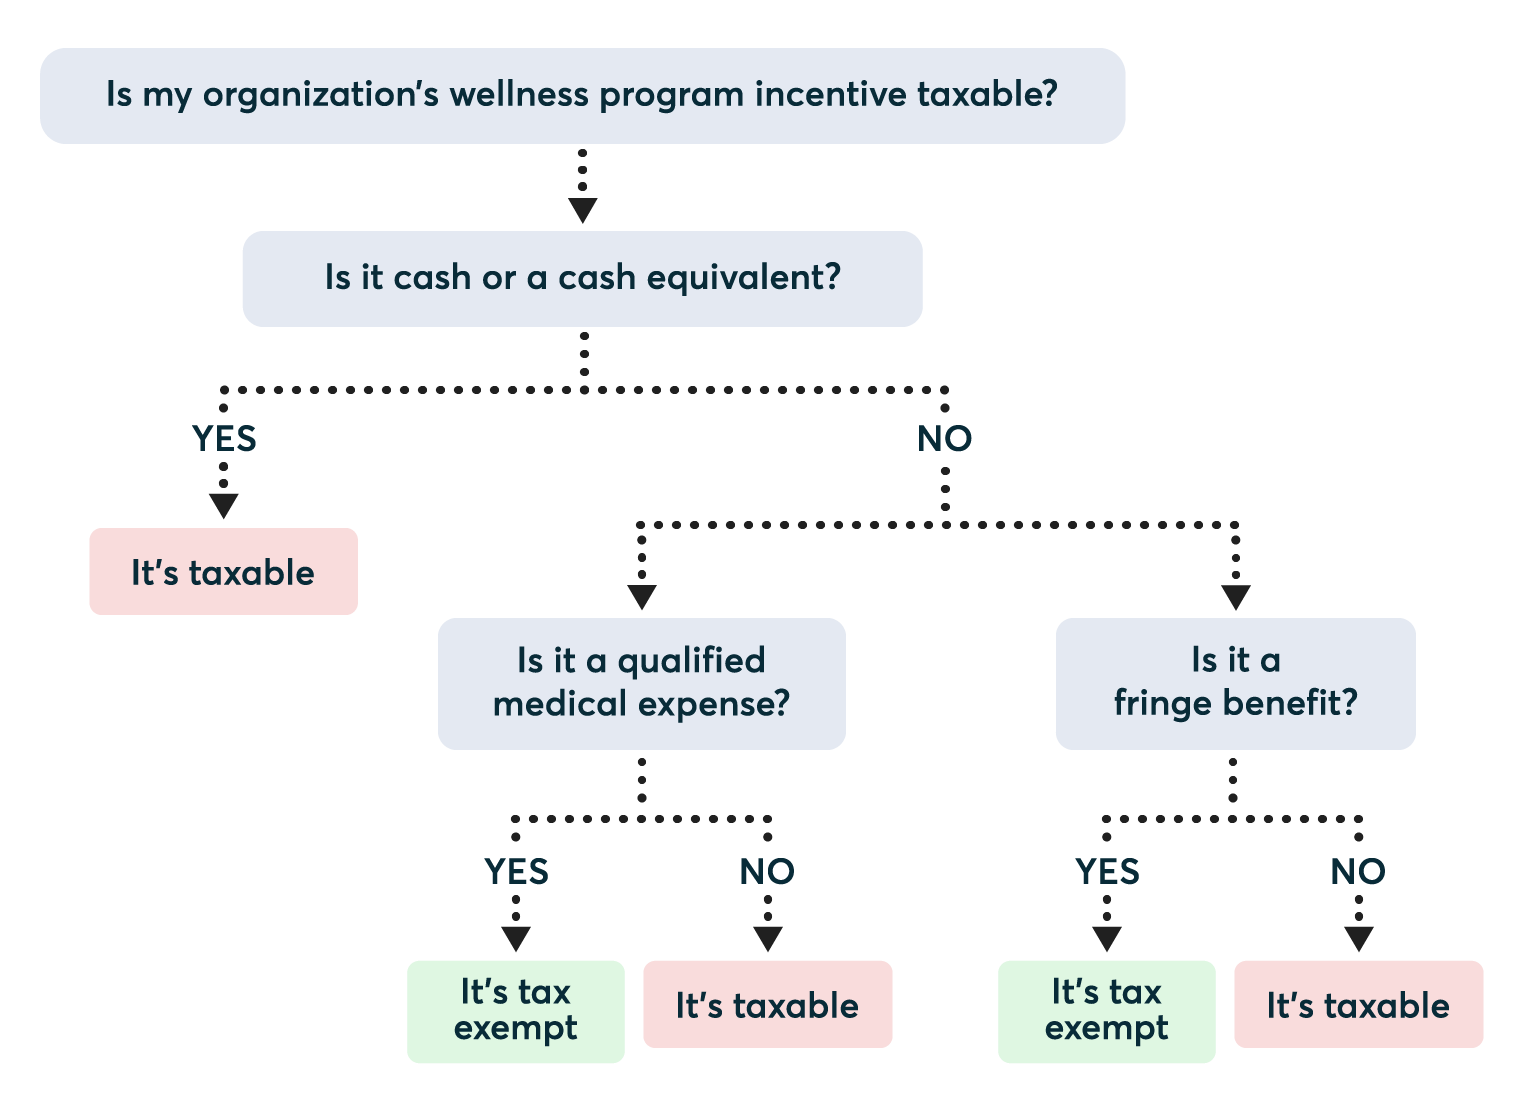 Decision Tree examining if an organization's wellness program is incentive taxable